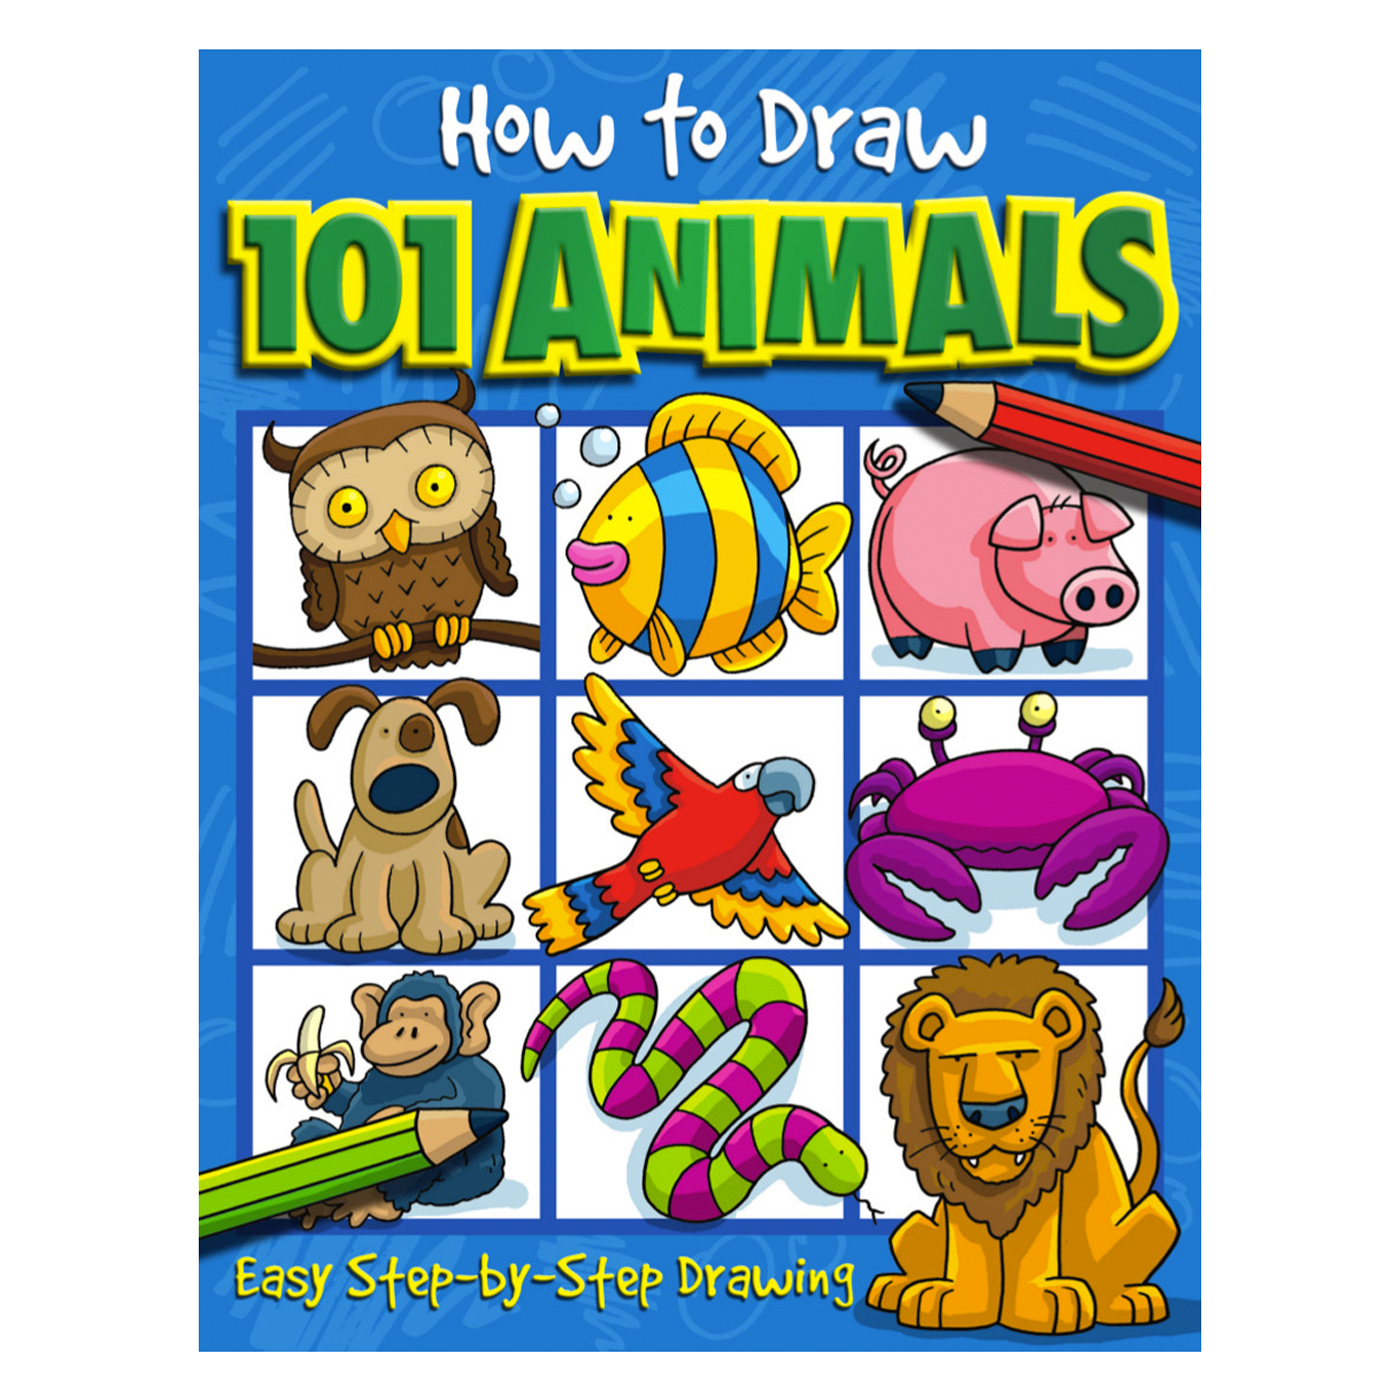  How To Draw 101 Animals